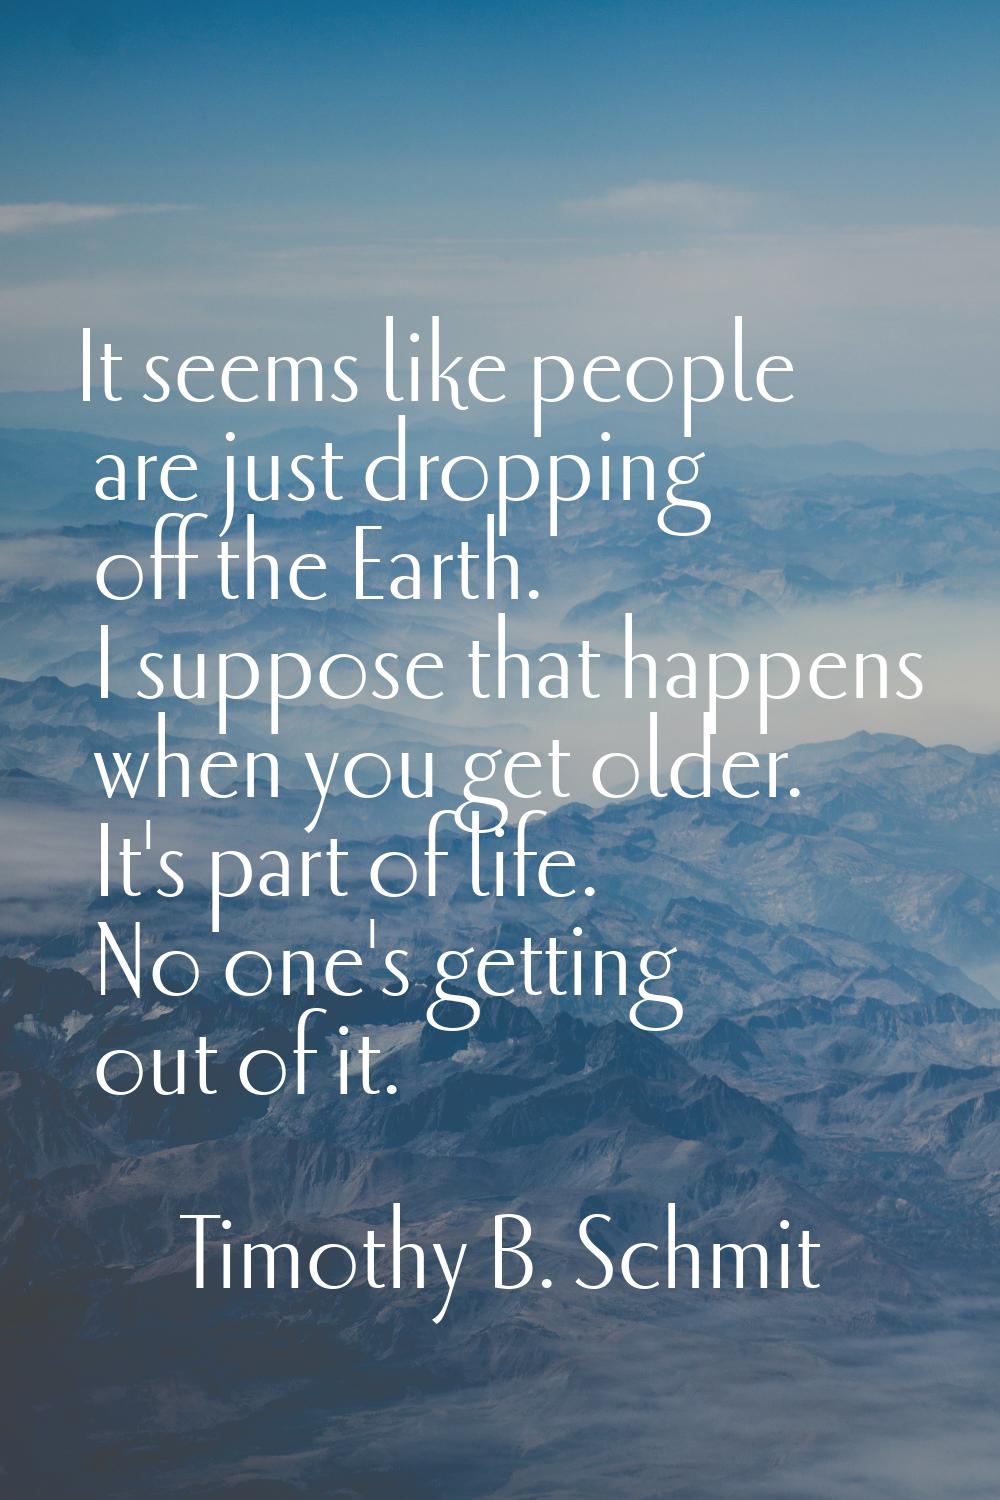 It seems like people are just dropping off the Earth. I suppose that happens when you get older. It